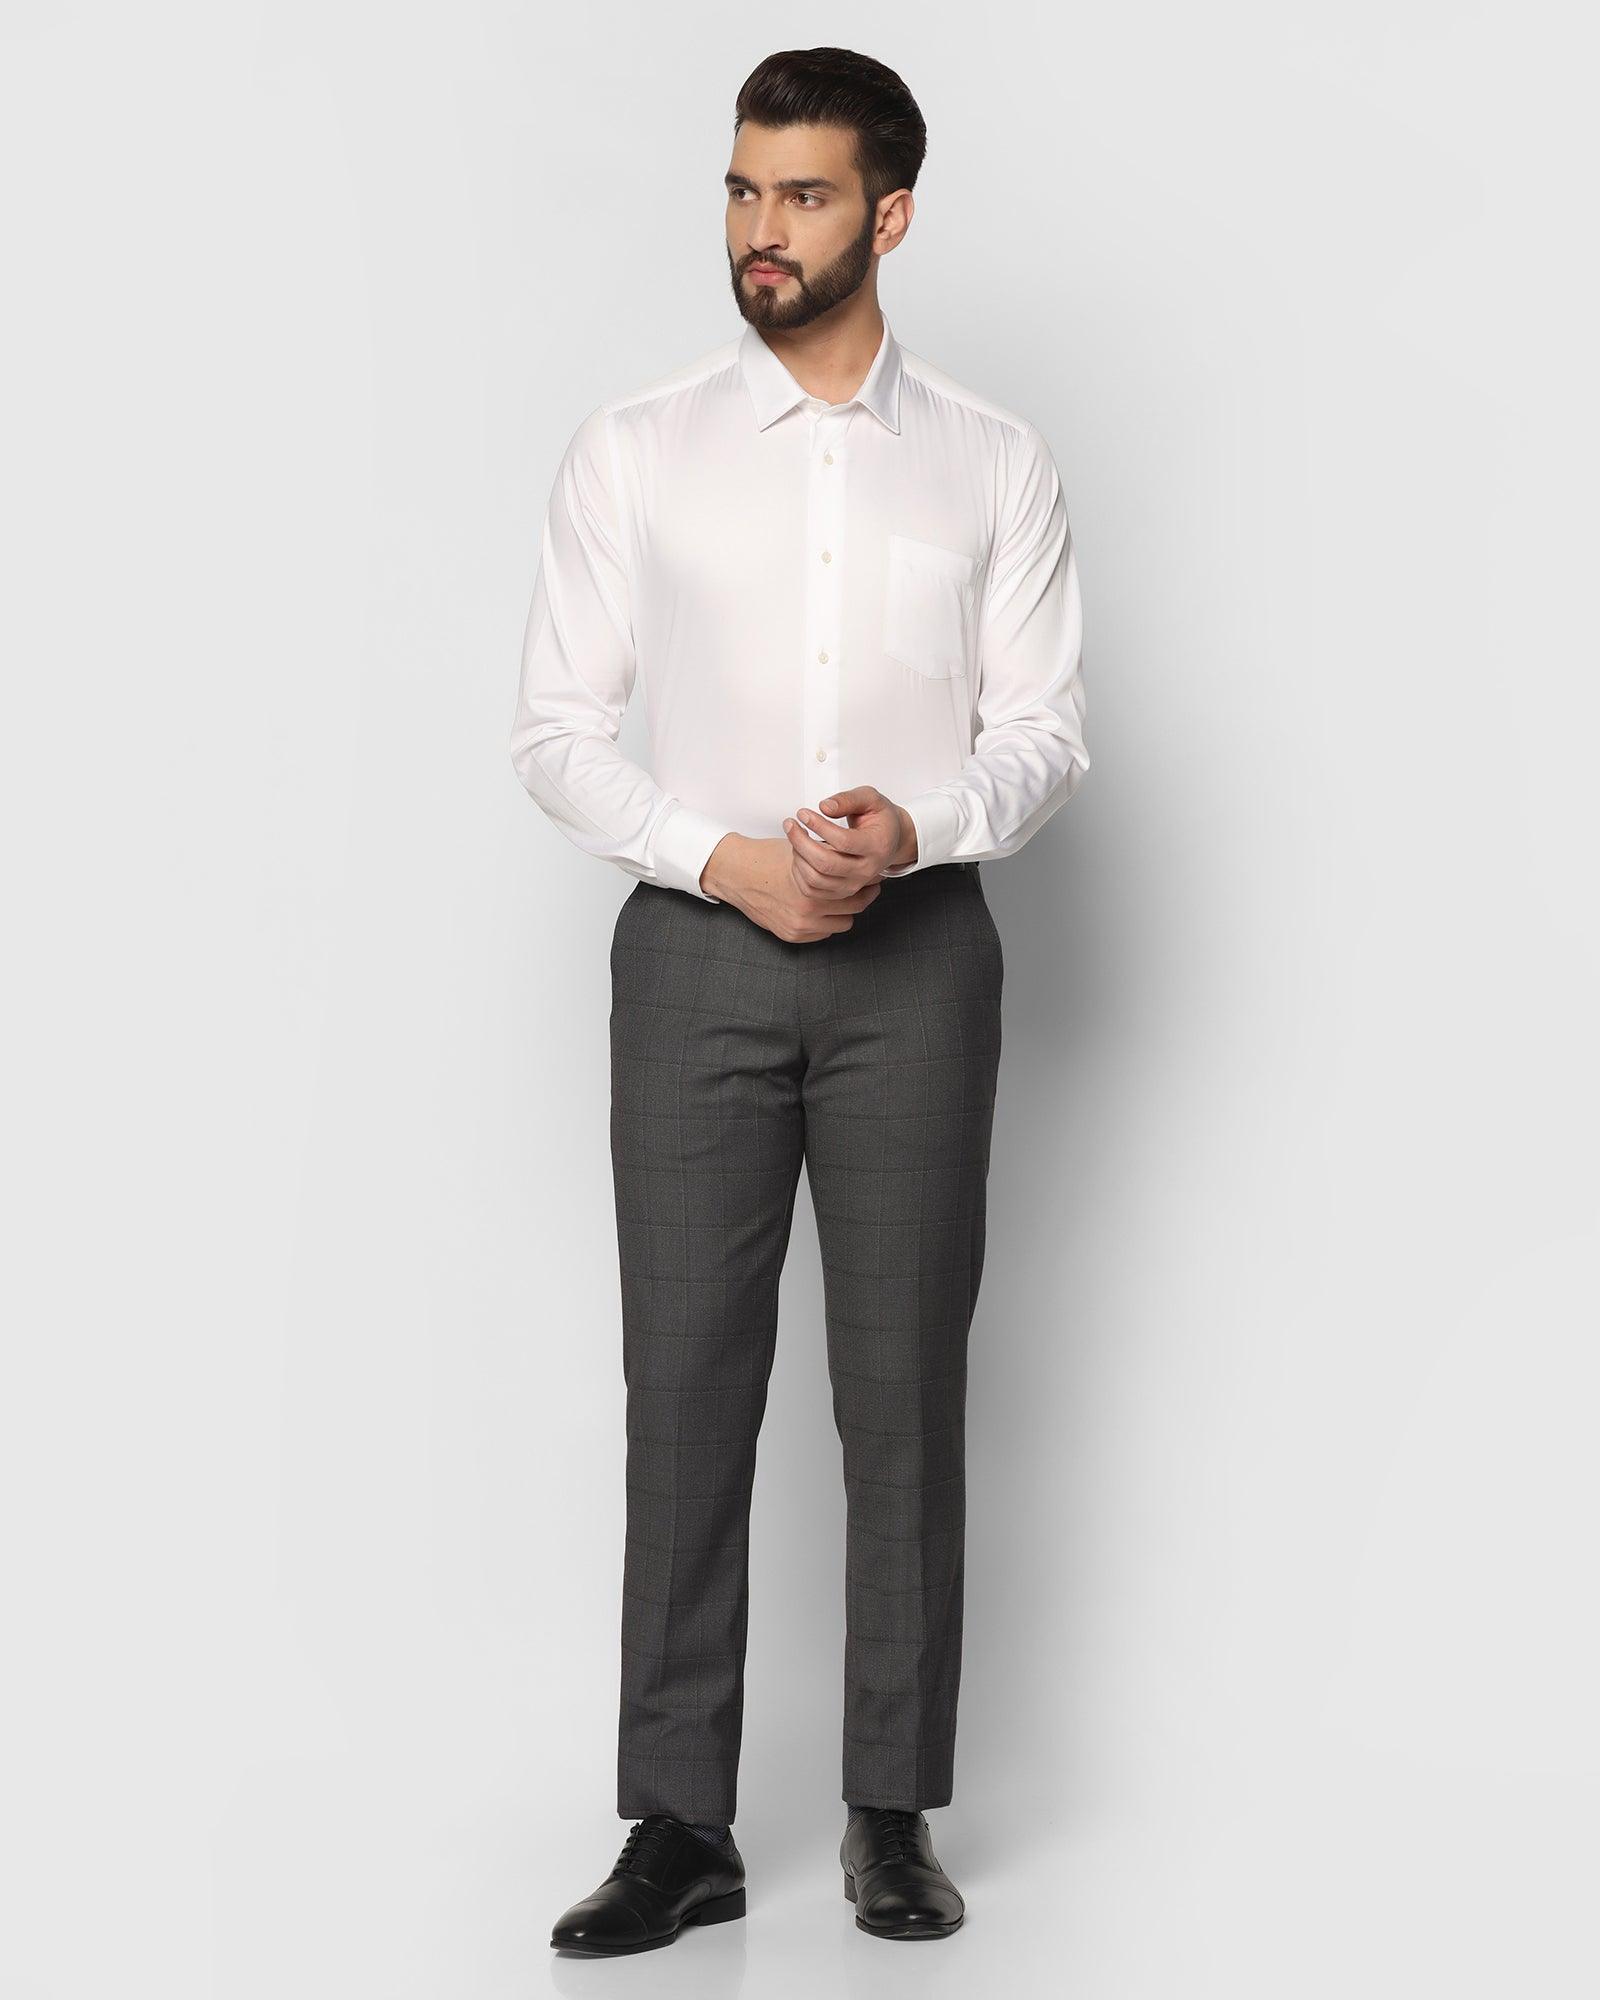 Suit trousers Muscle Fit - Dark grey/Checked - Men | H&M IN